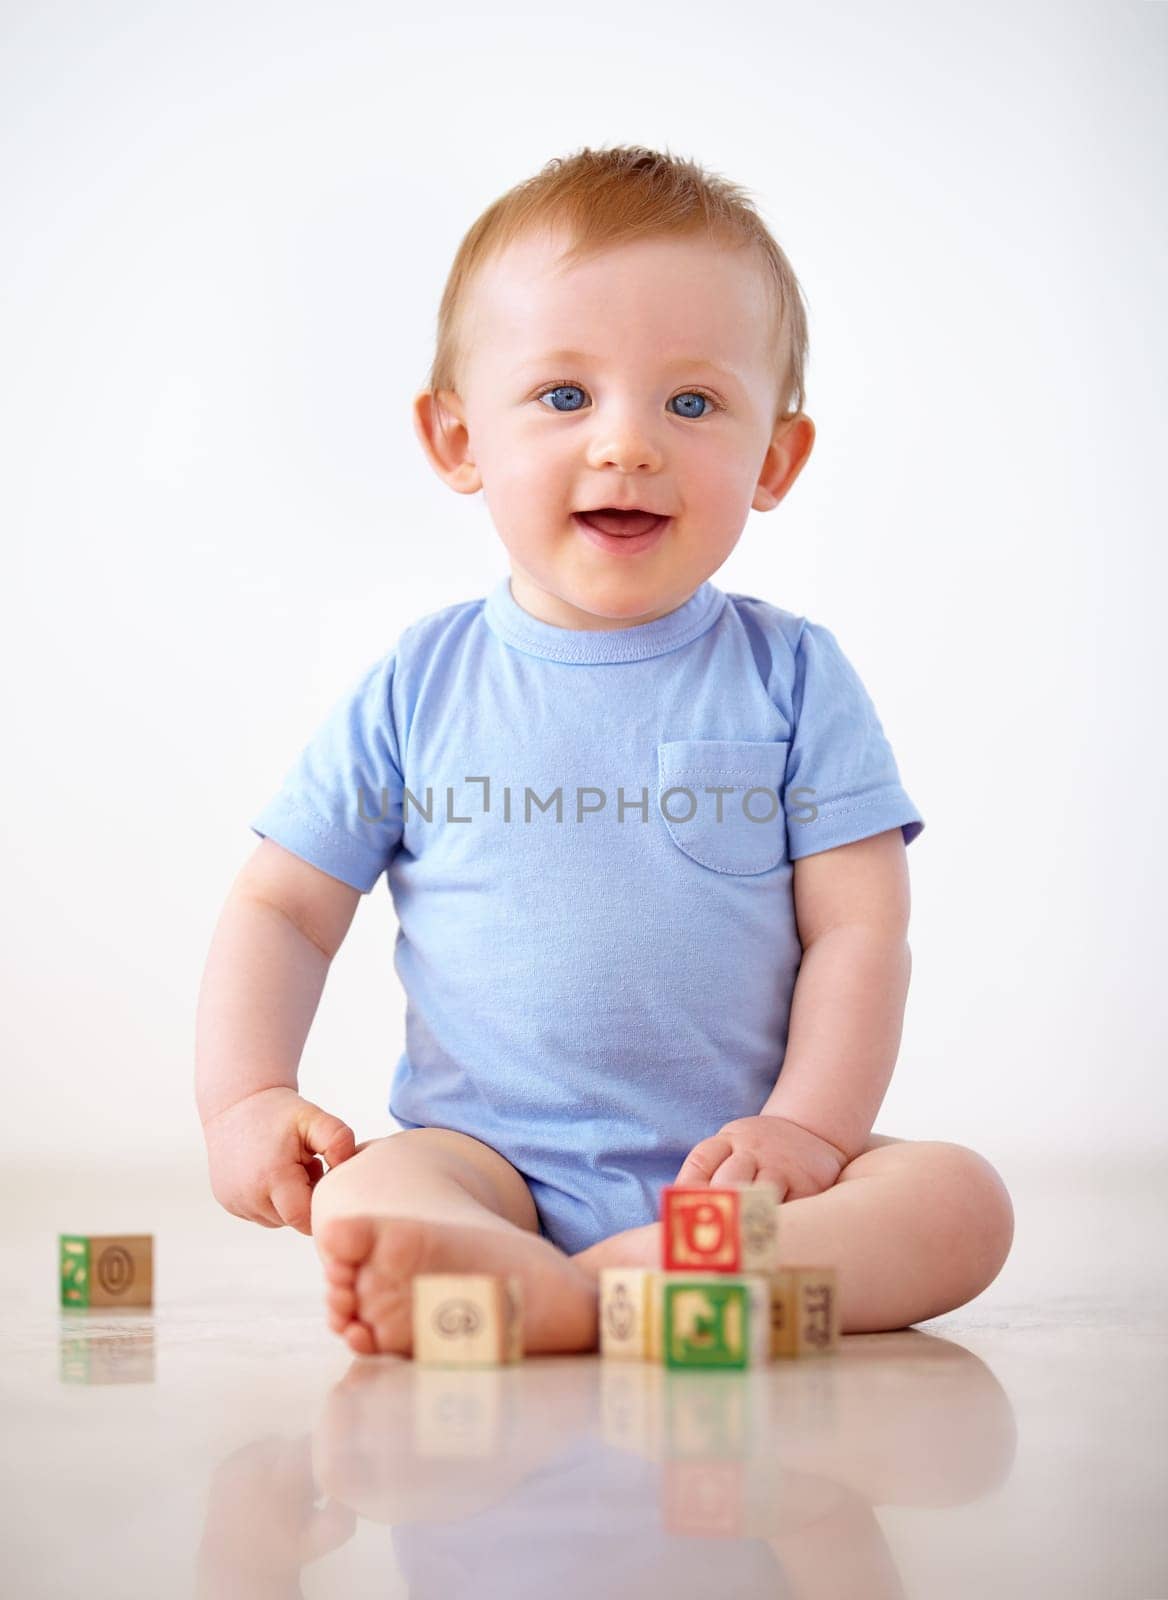 Happy, baby with toy blocks and playing against a white background with smile. Child development or learning, happiness or health wellness and boy toddler play against a studio backdrop on floor.